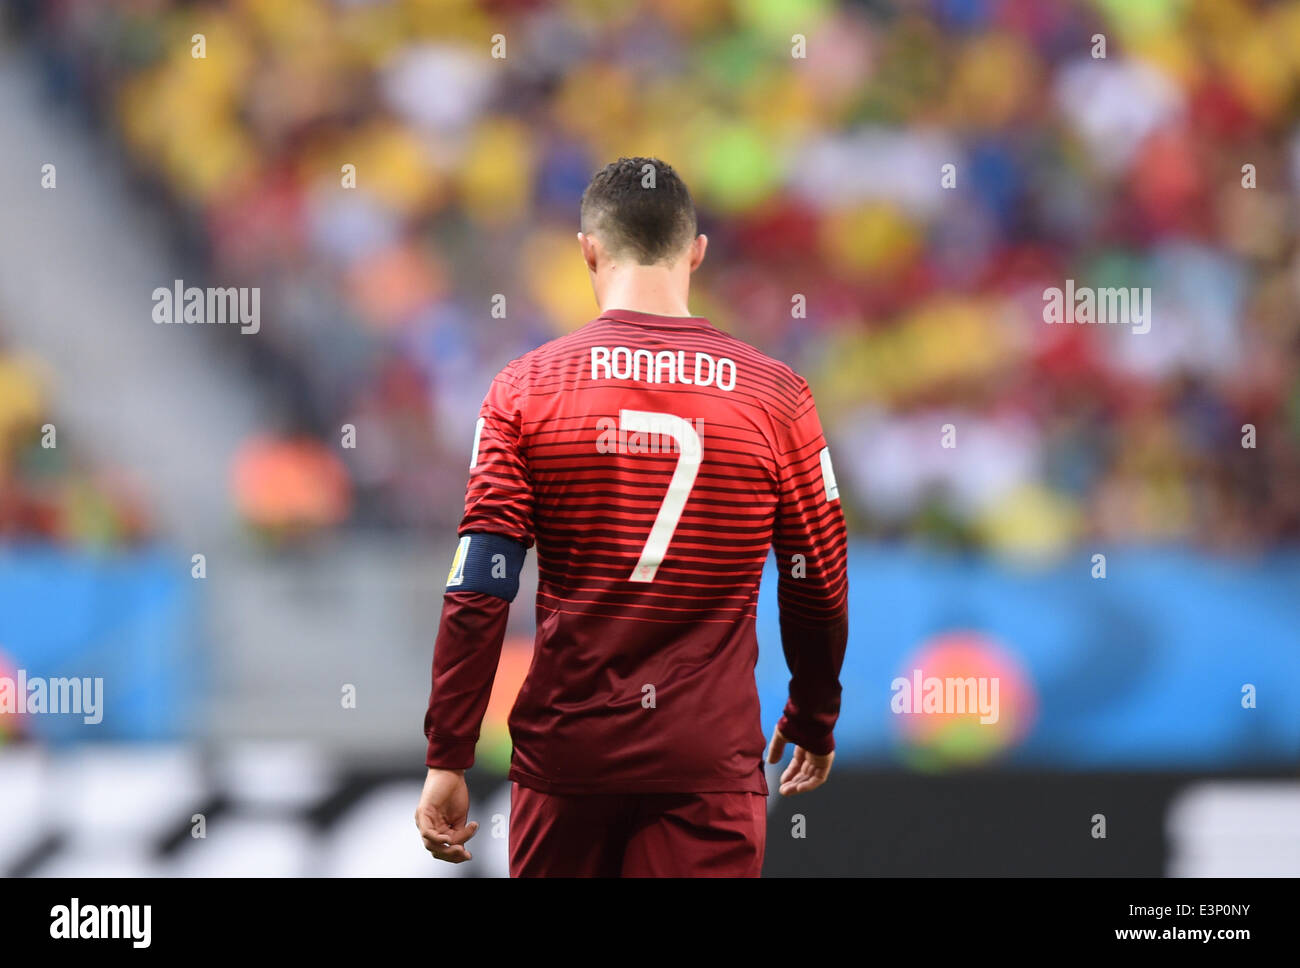 Brasilia, Brazil. 26th June, 2014. Cristiano Ronaldo of Portugal reacts during the FIFA World Cup 2014 group G preliminary round match between Portugal and Ghana at the Estadio National Stadium in Brasilia, Brazil, on 26 June 2014 Credit: © dpa picture alliance/Alamy Live News  Stock Photo